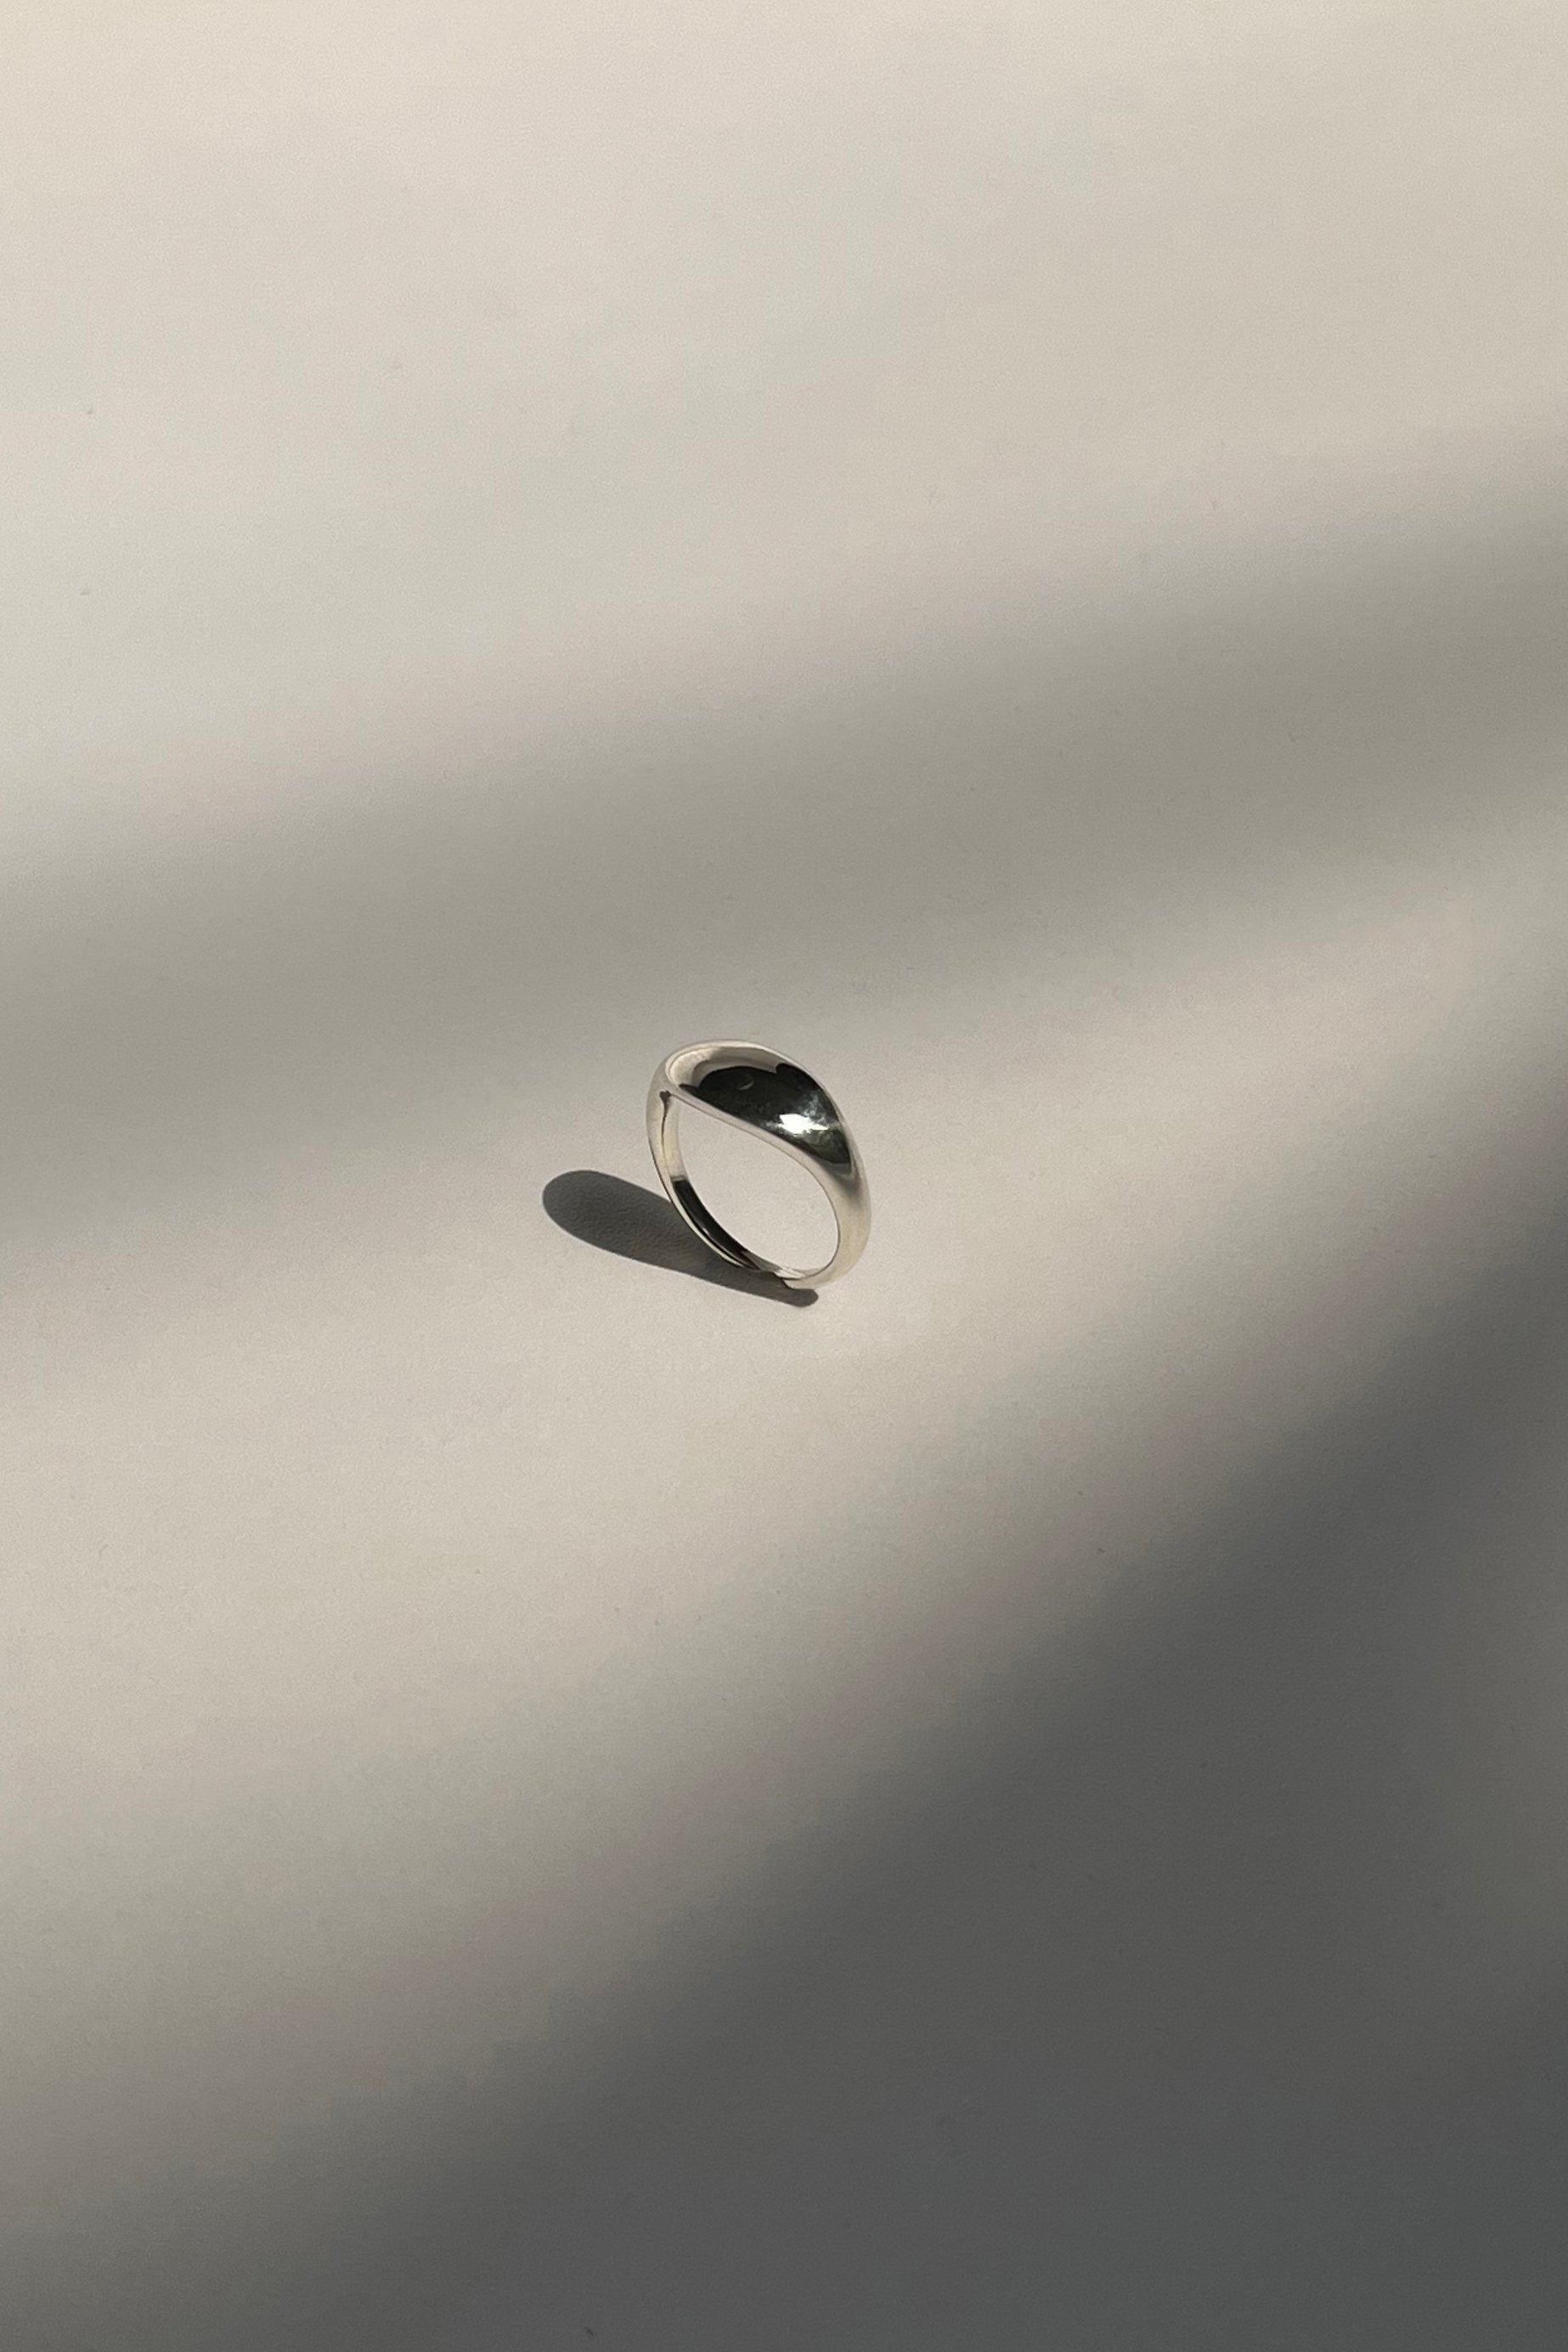 Image of Edition 4. Piece 12. Ring